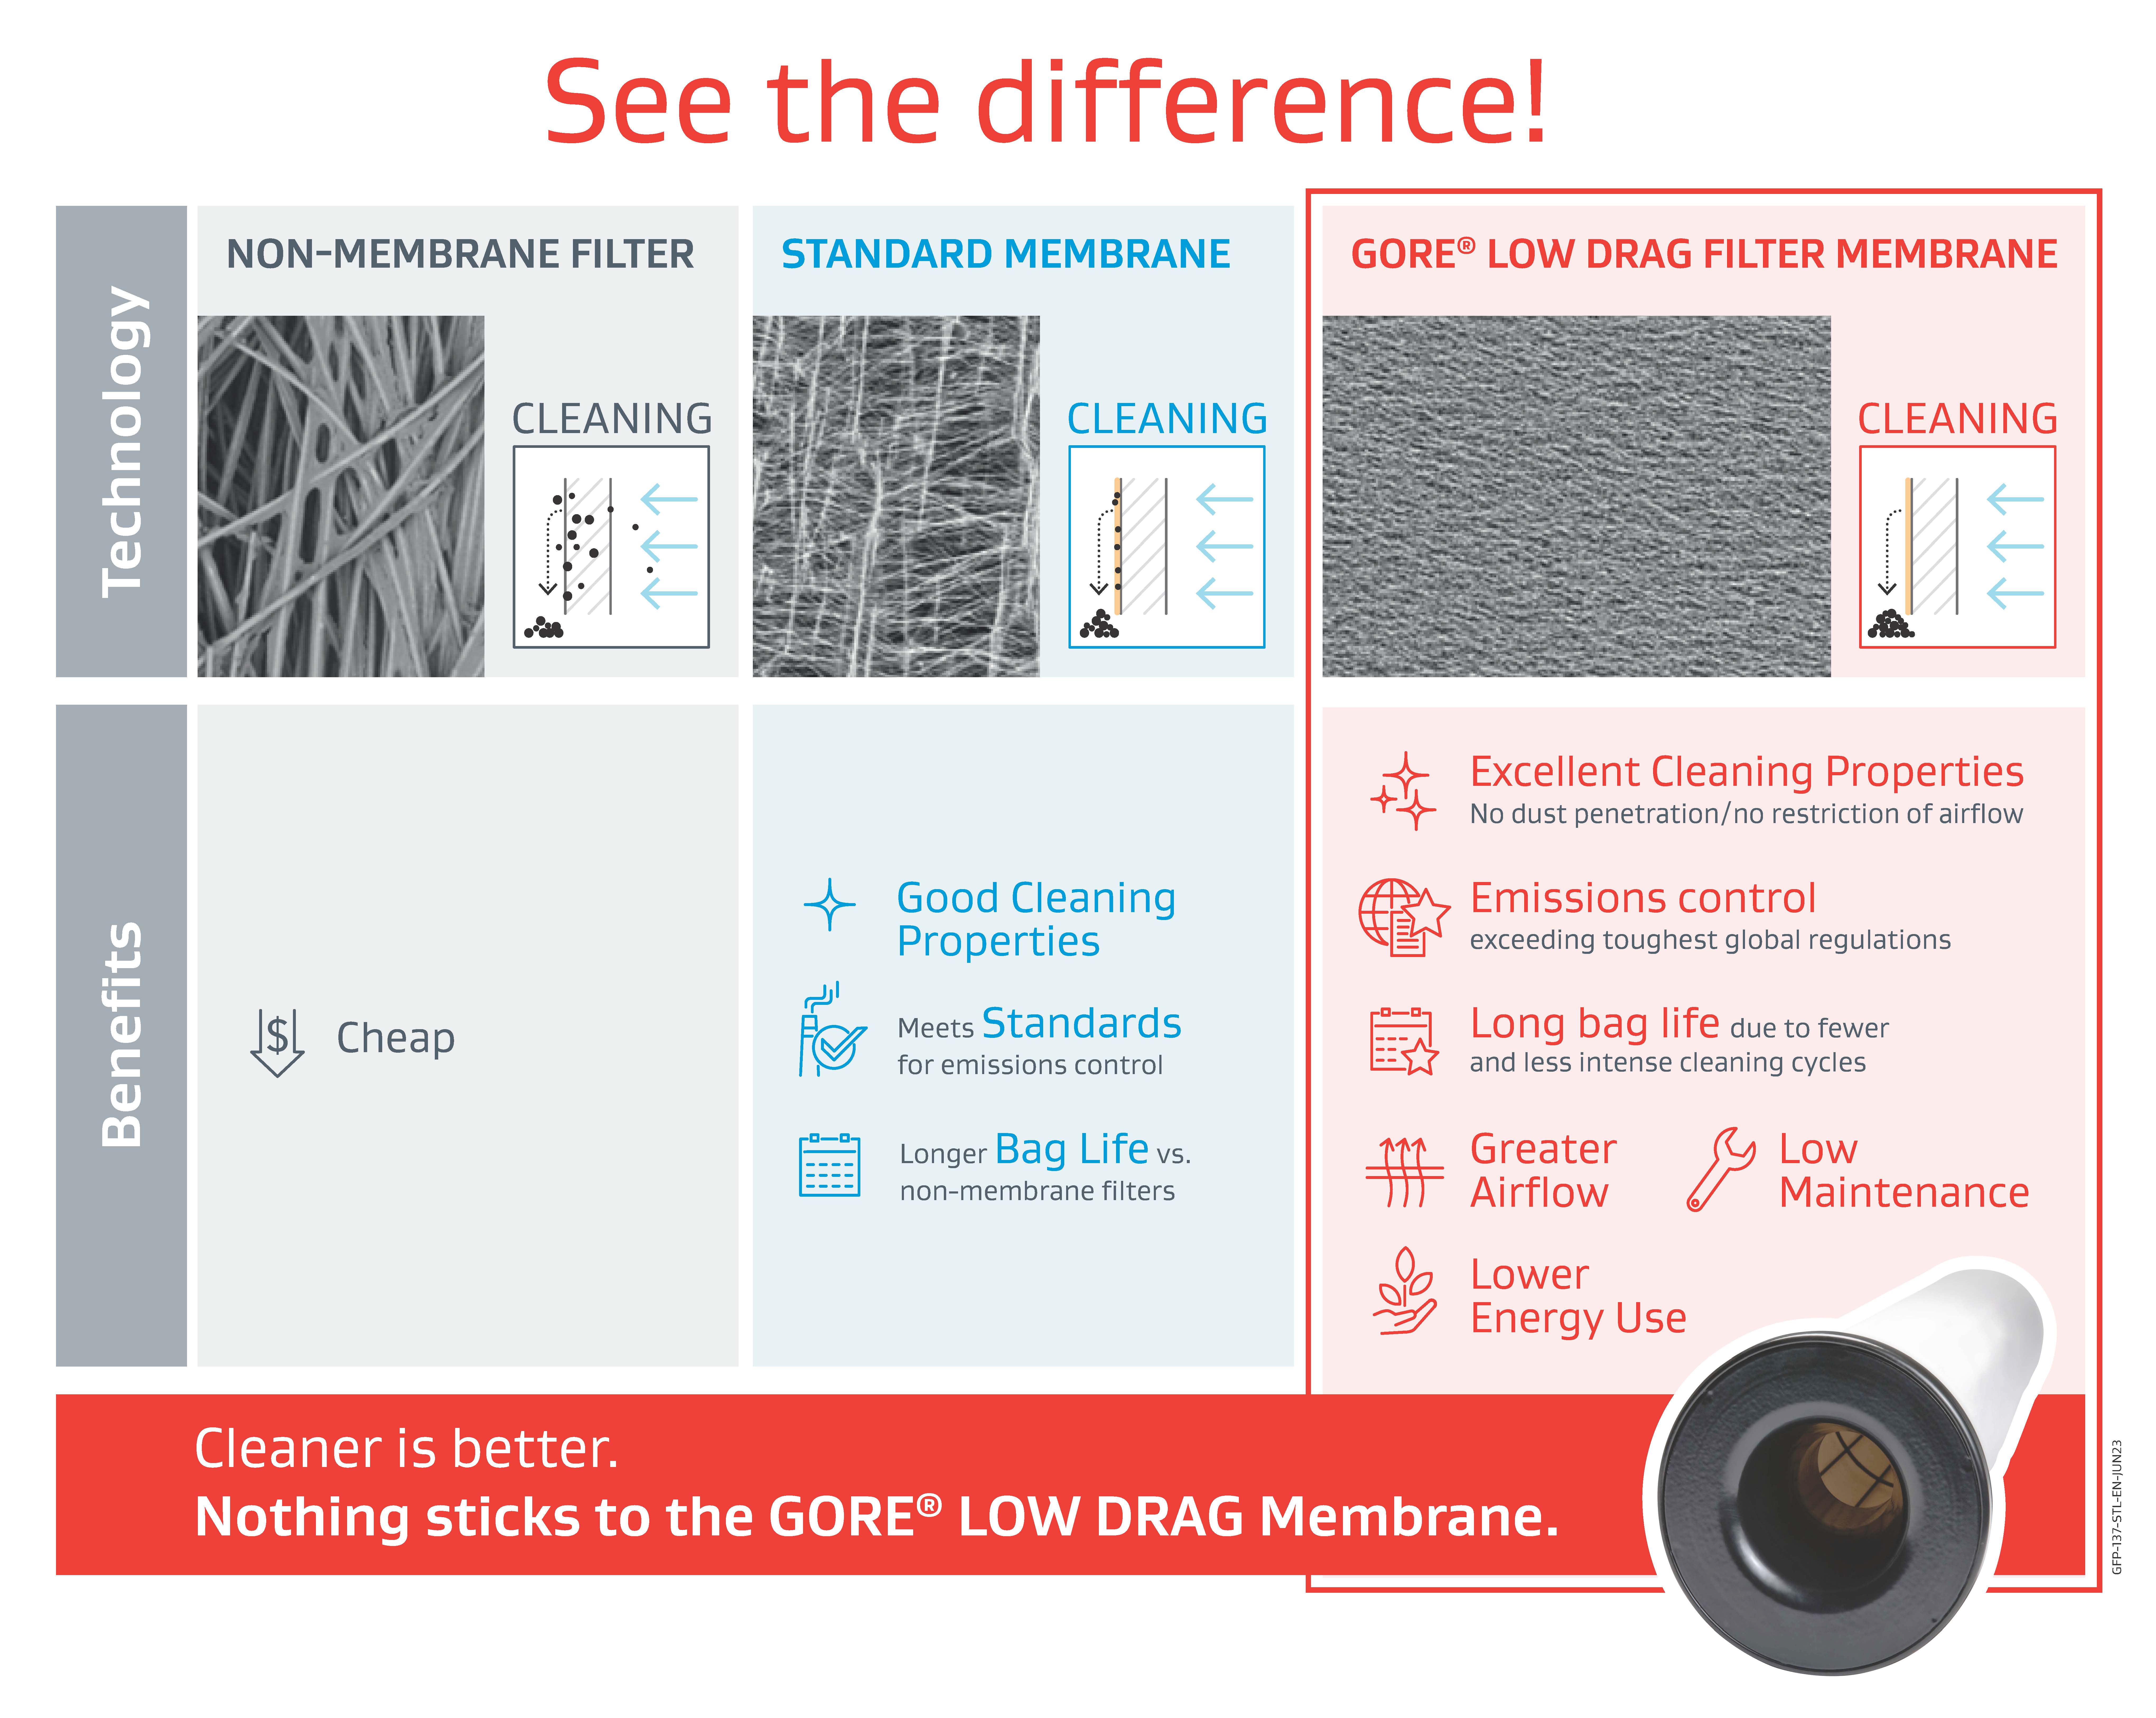 This infographic illustrates the difference between non-membrane and standard membrane filter bags. Learn how GORE LOW DRAG Filter Bags outperform both in terms of emission control, bag life, and energy costs.